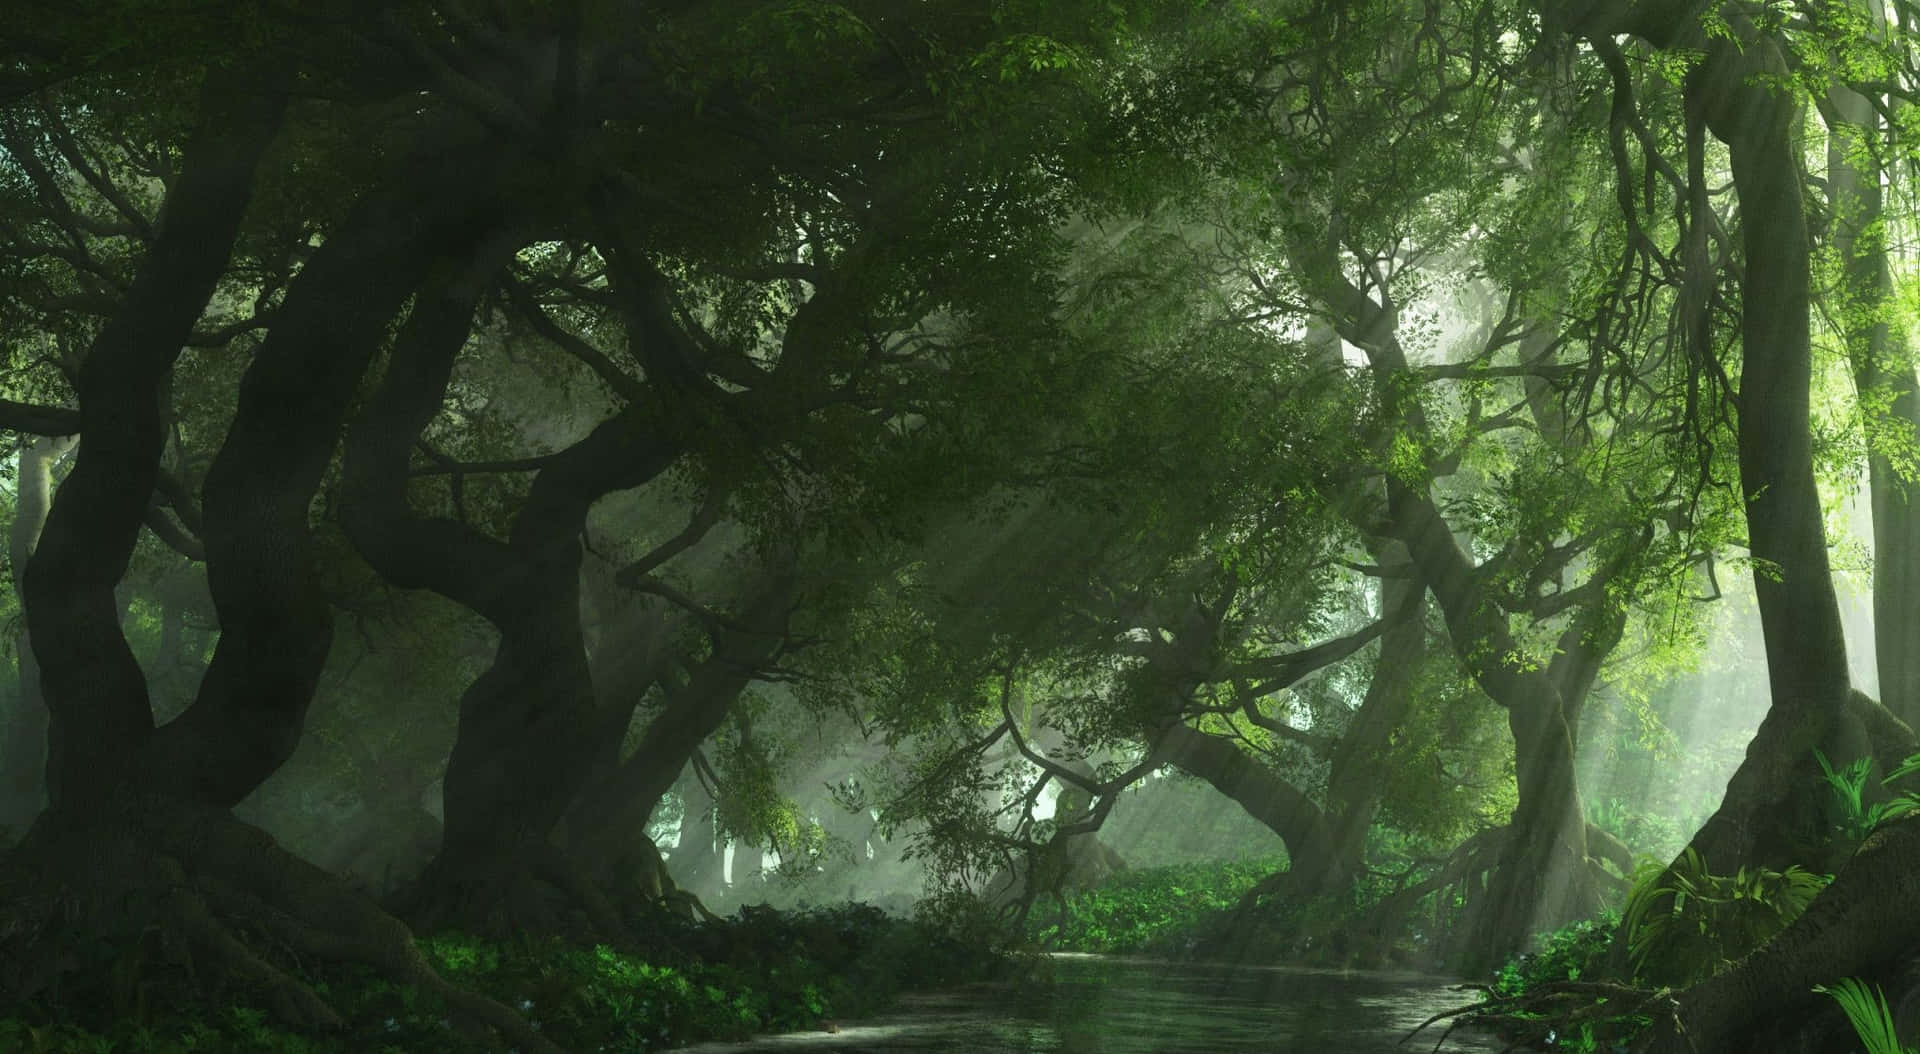 128 Anime Forest Background